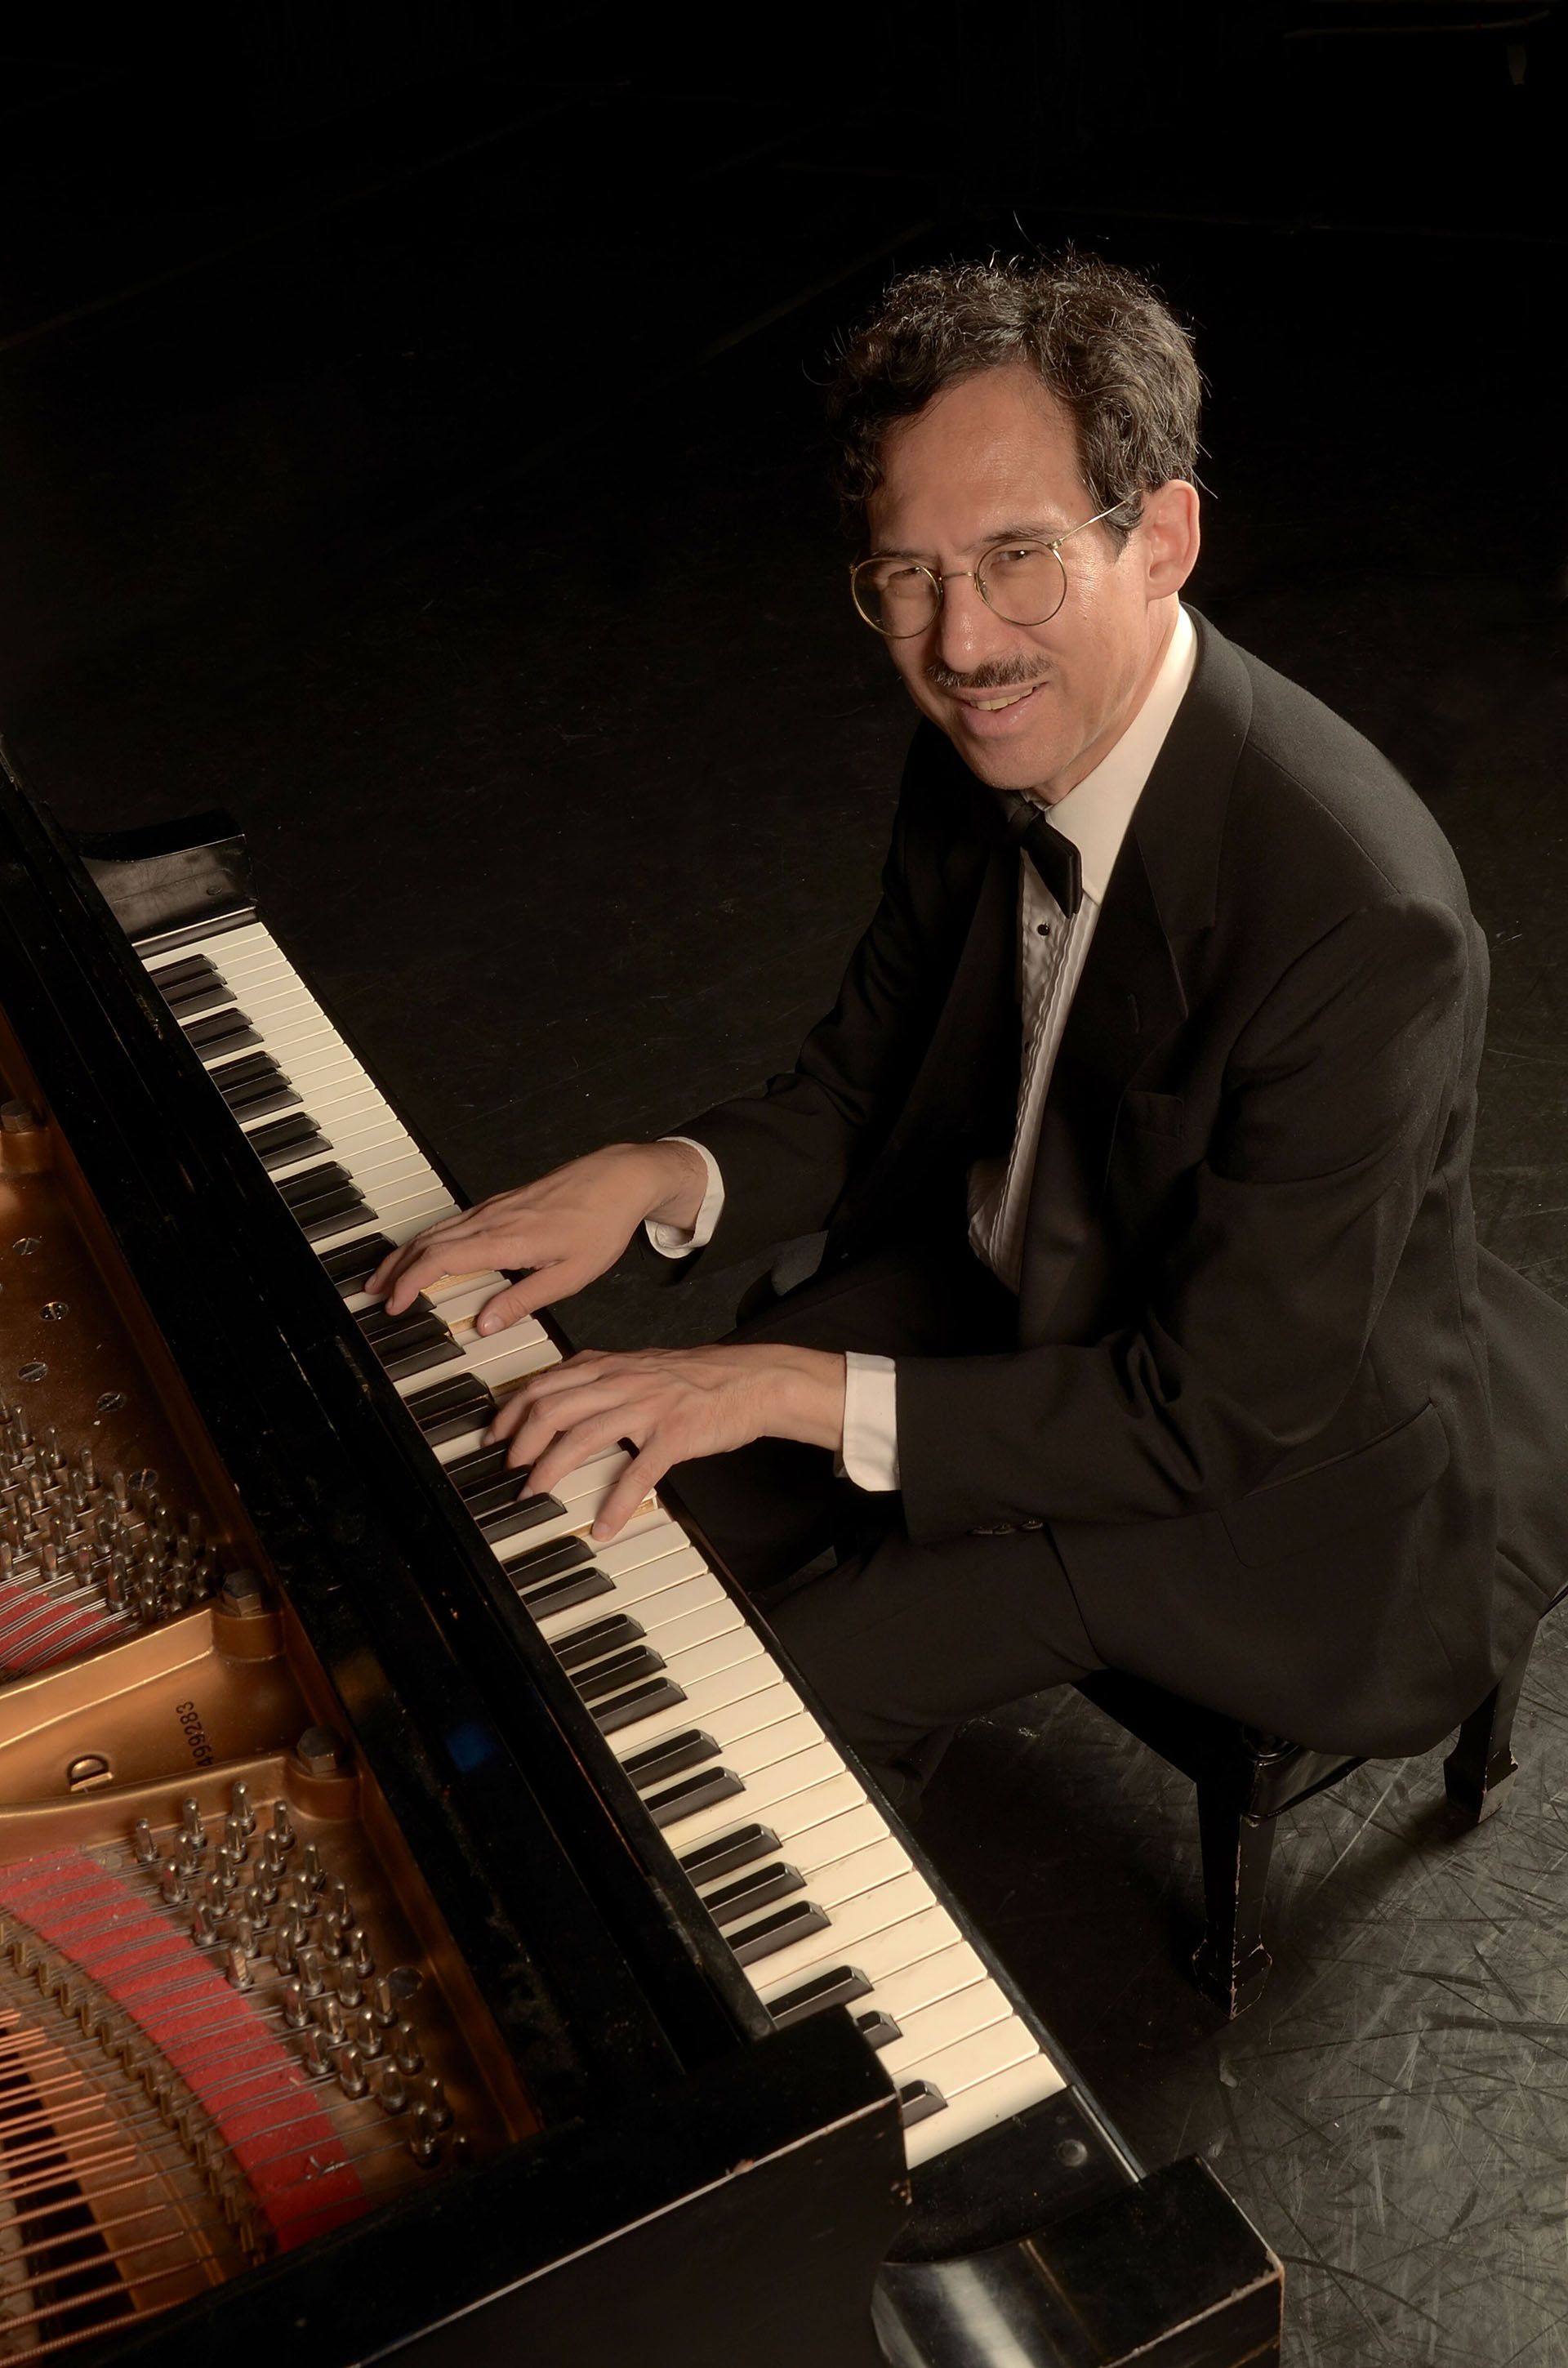 Michael Arnowitt wearing a tux and smiling while playing grand piano.